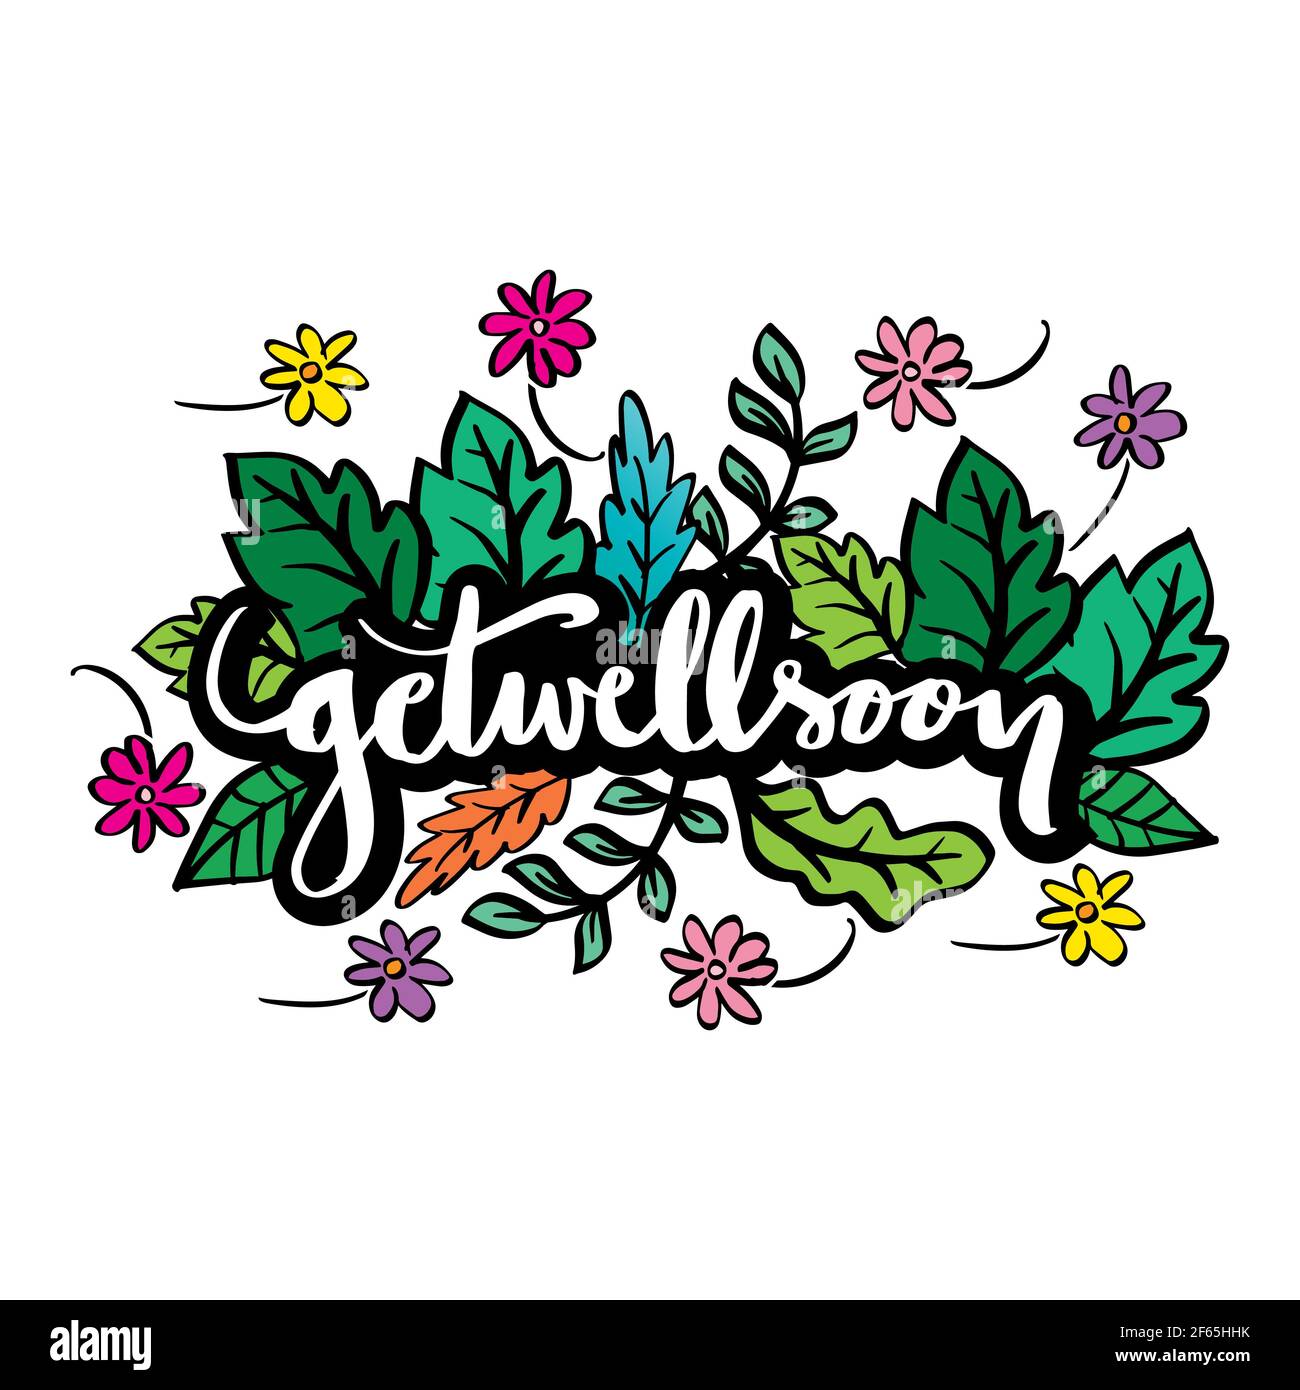 Get well soon card decorated with hand drawn flowers. Stock Photo